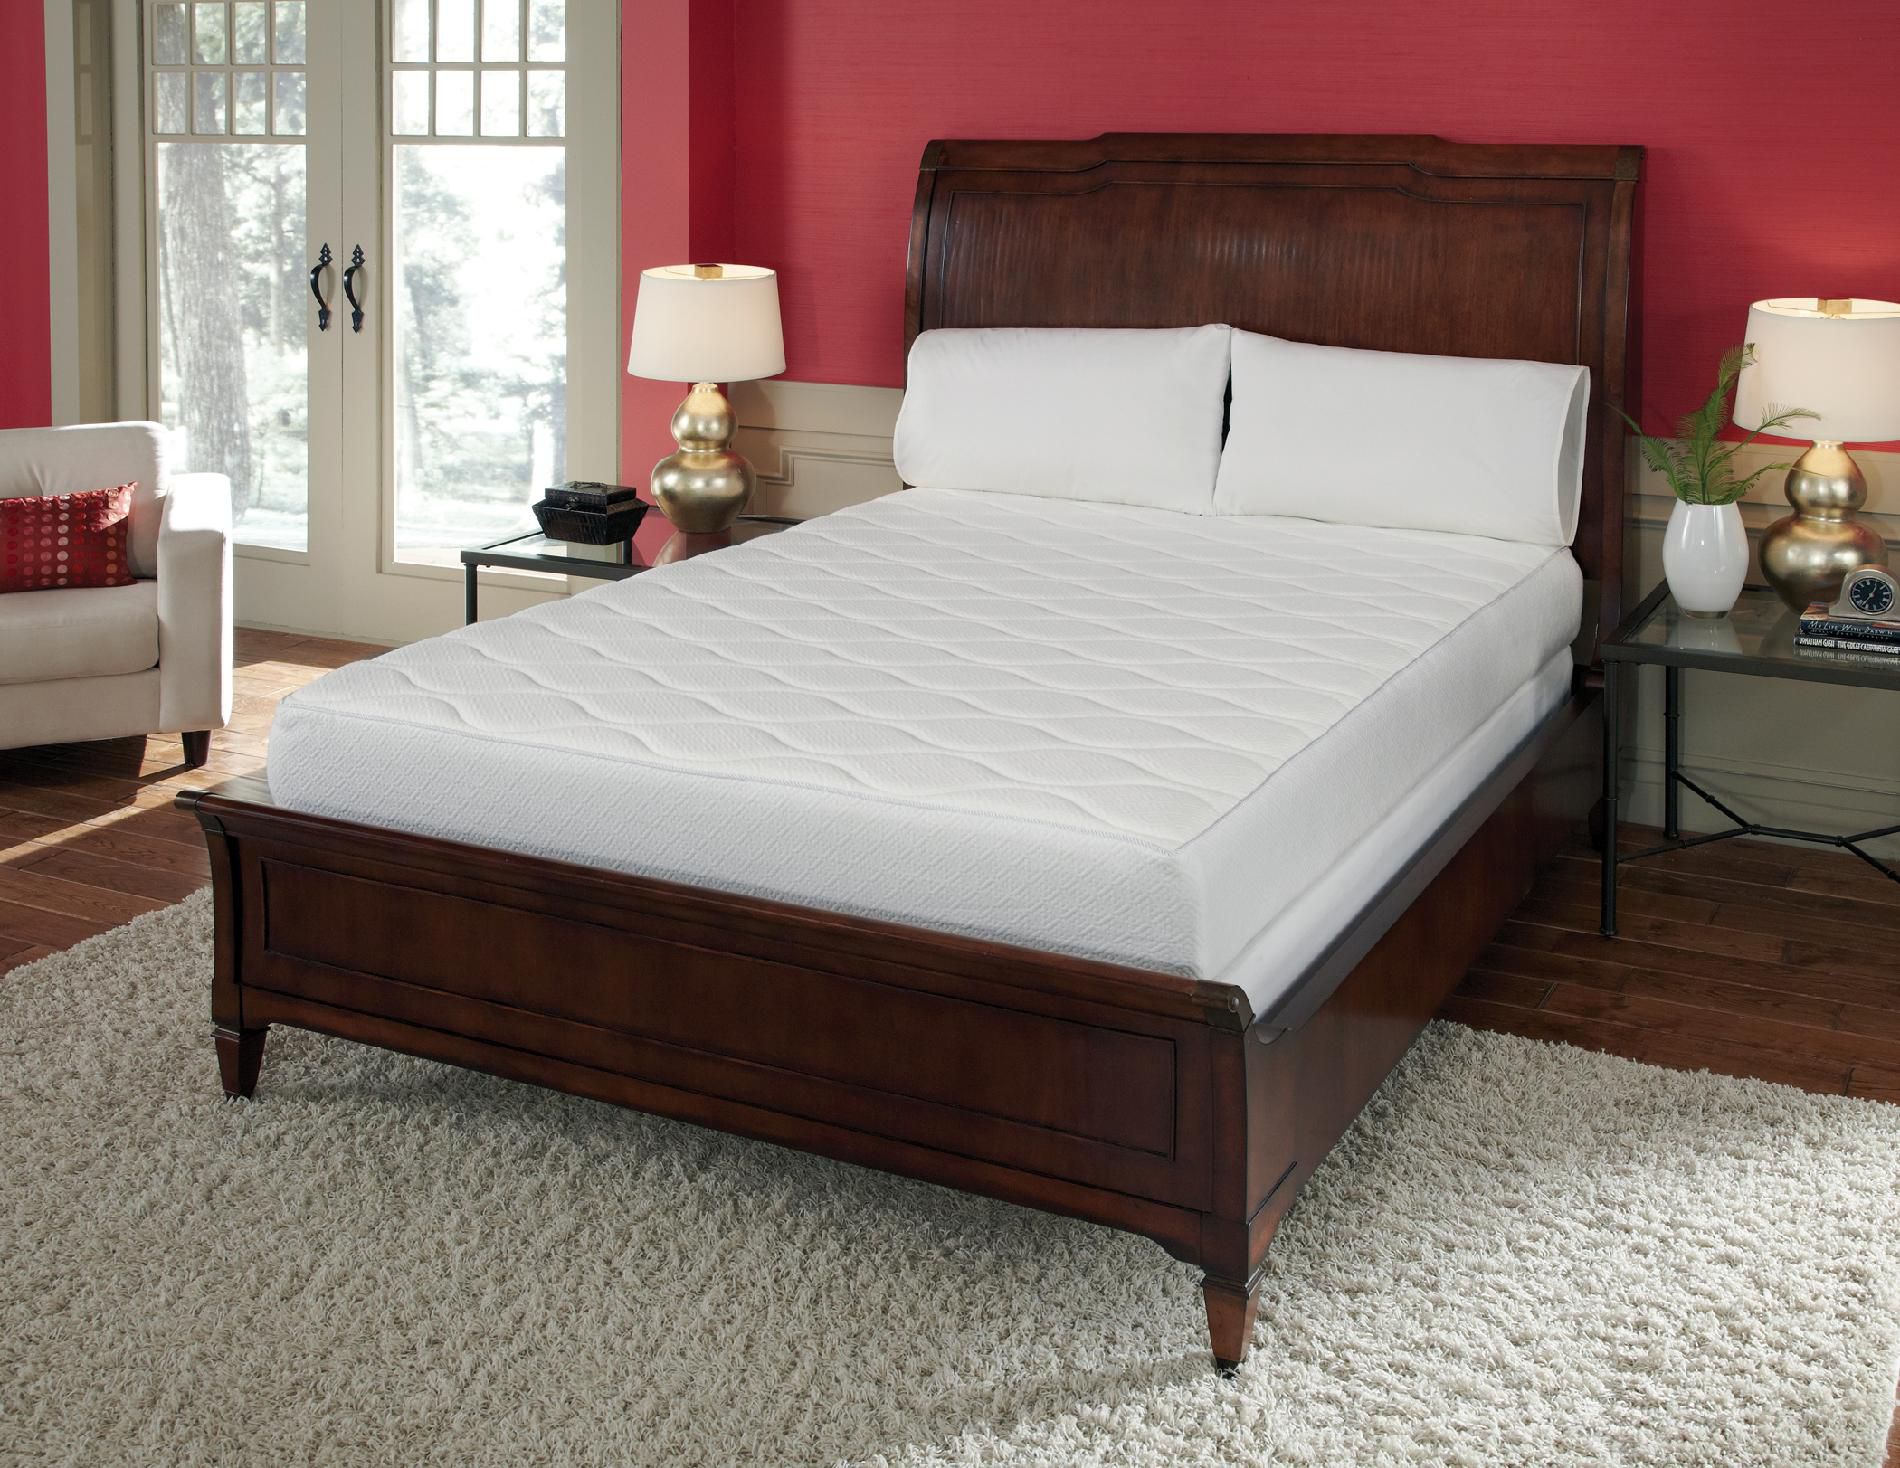 Pure Rest 10 inch Top Quilted Memory Foam Mattress: California King Si